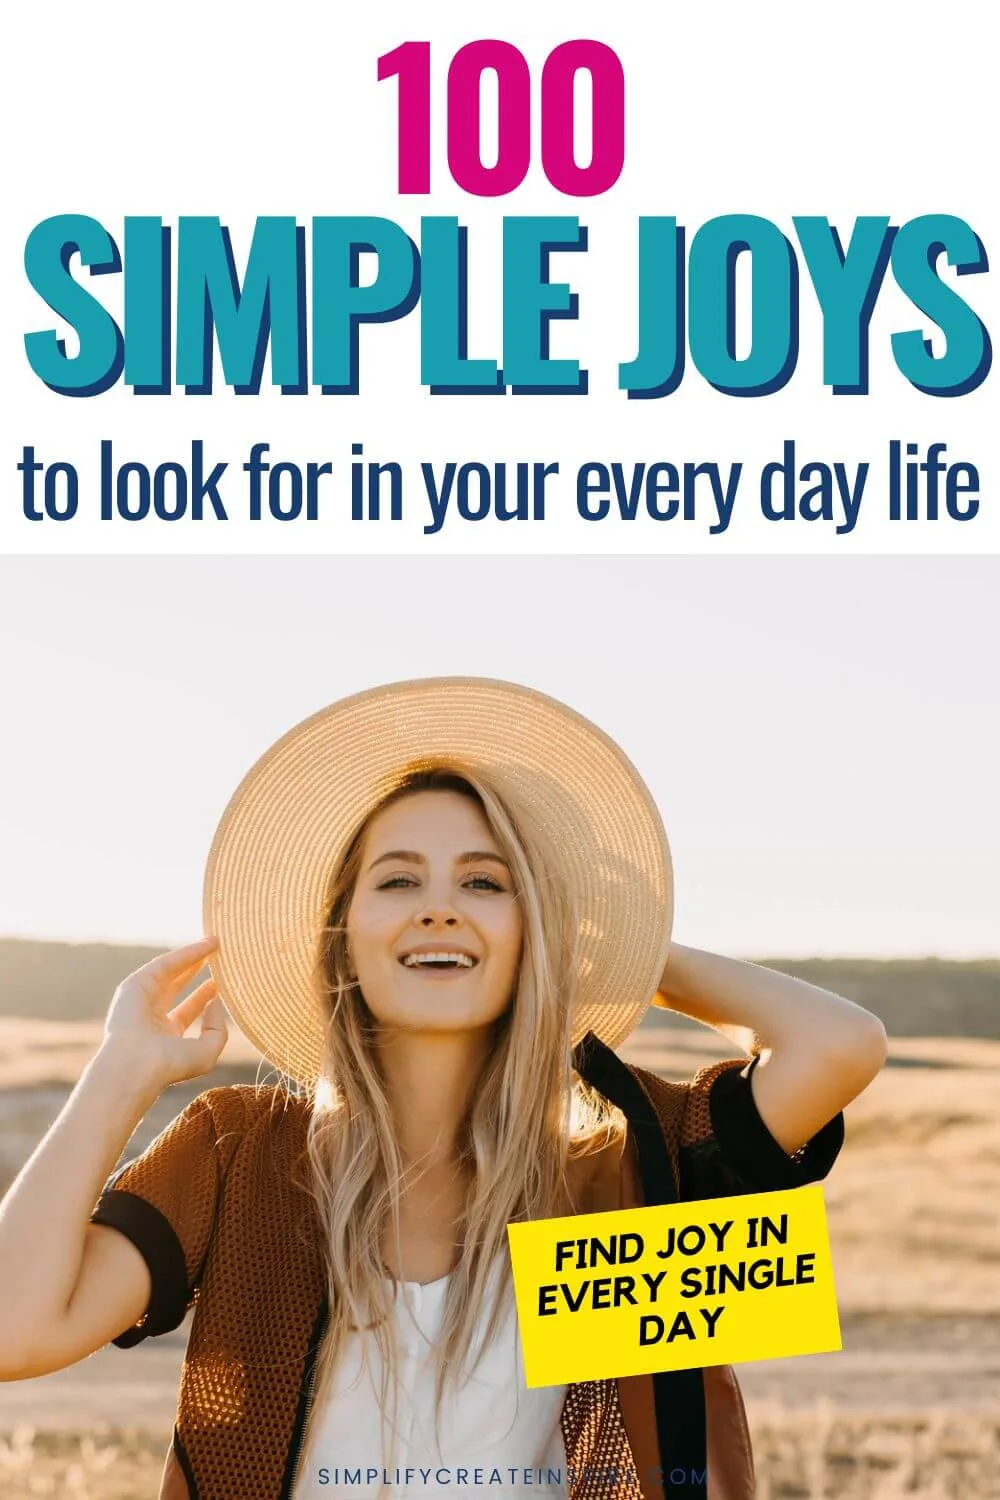 100 simple joys to look for in your everyday life.